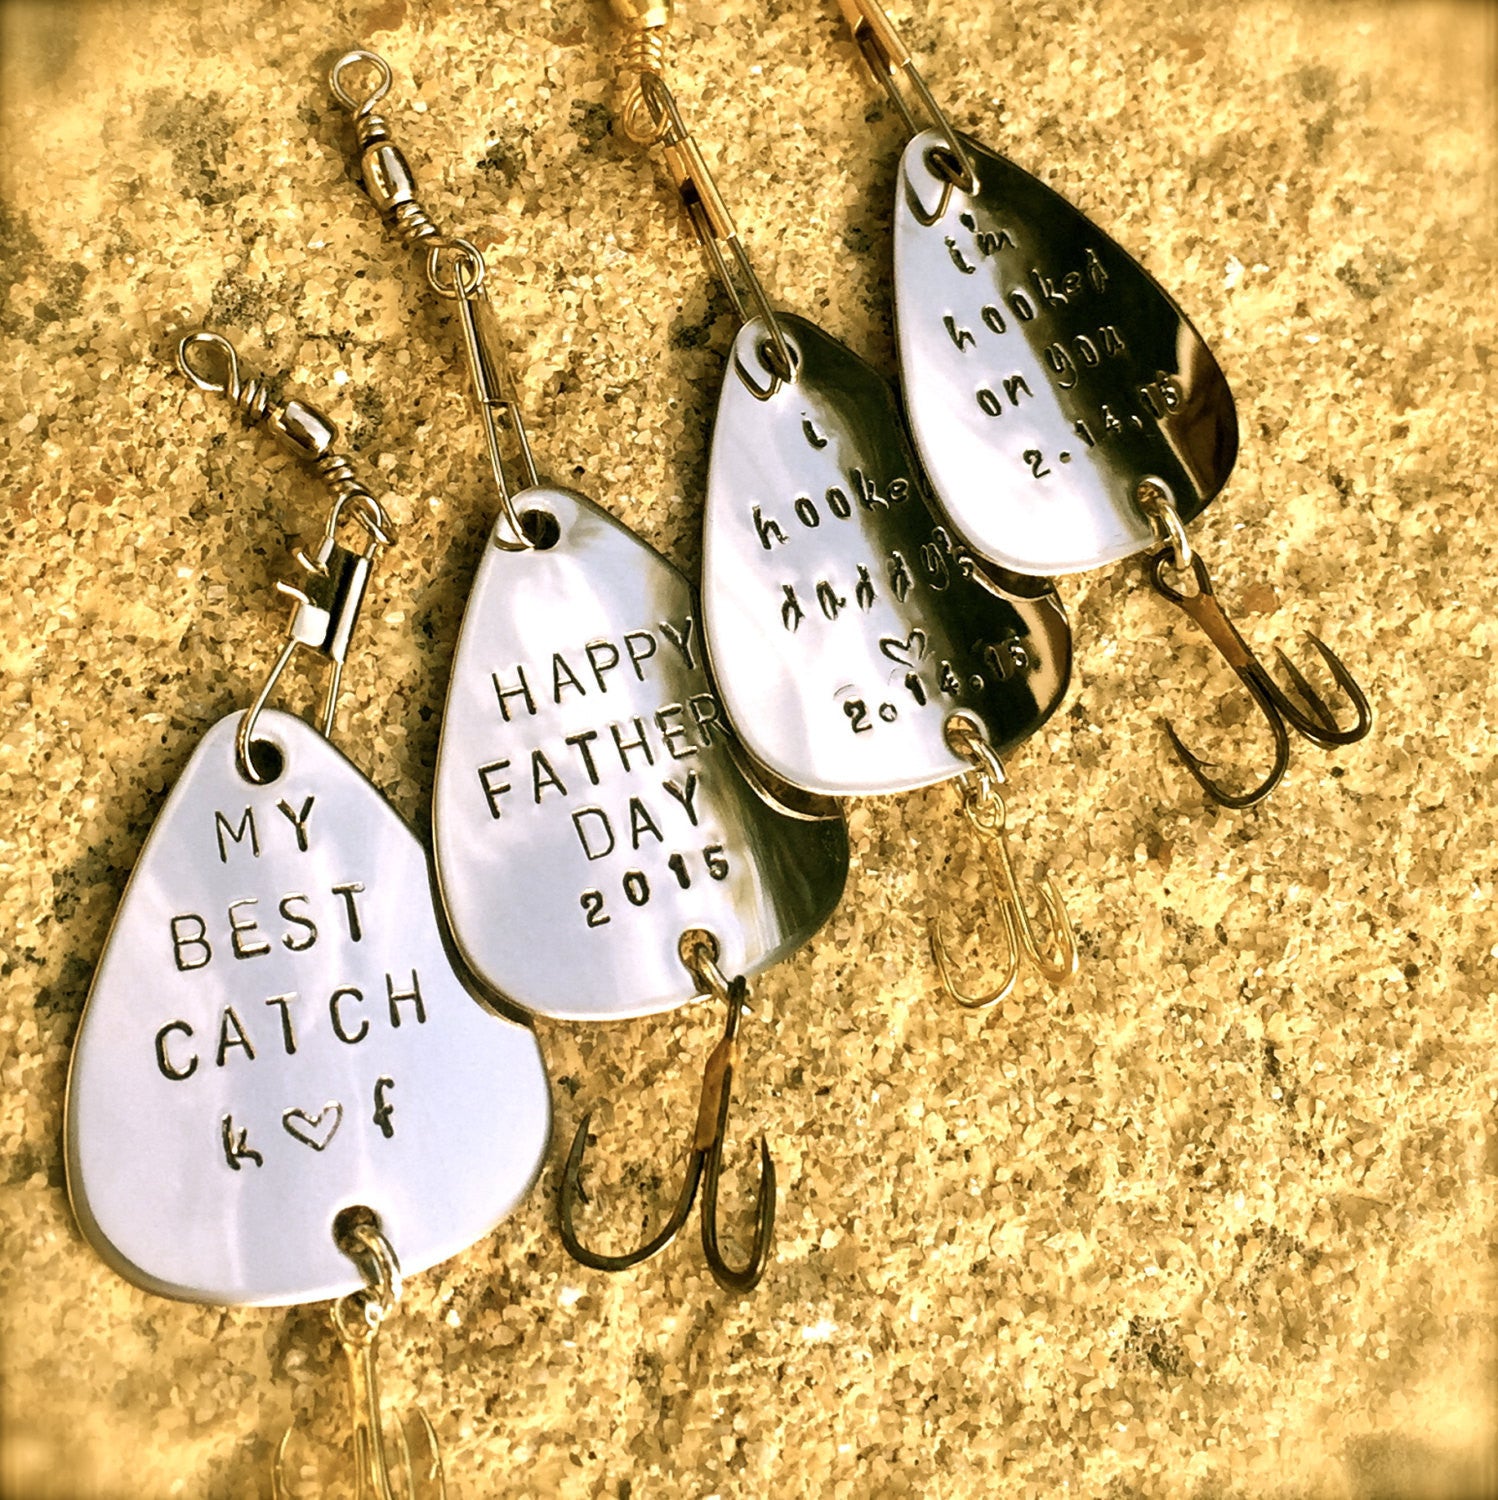 Fishing Lure, Personalized Fishing Lure, My Best Catch - Natashaaloha, jewelry, bracelets, necklace, keychains, fishing lures, gifts for men, charms, personalized, 